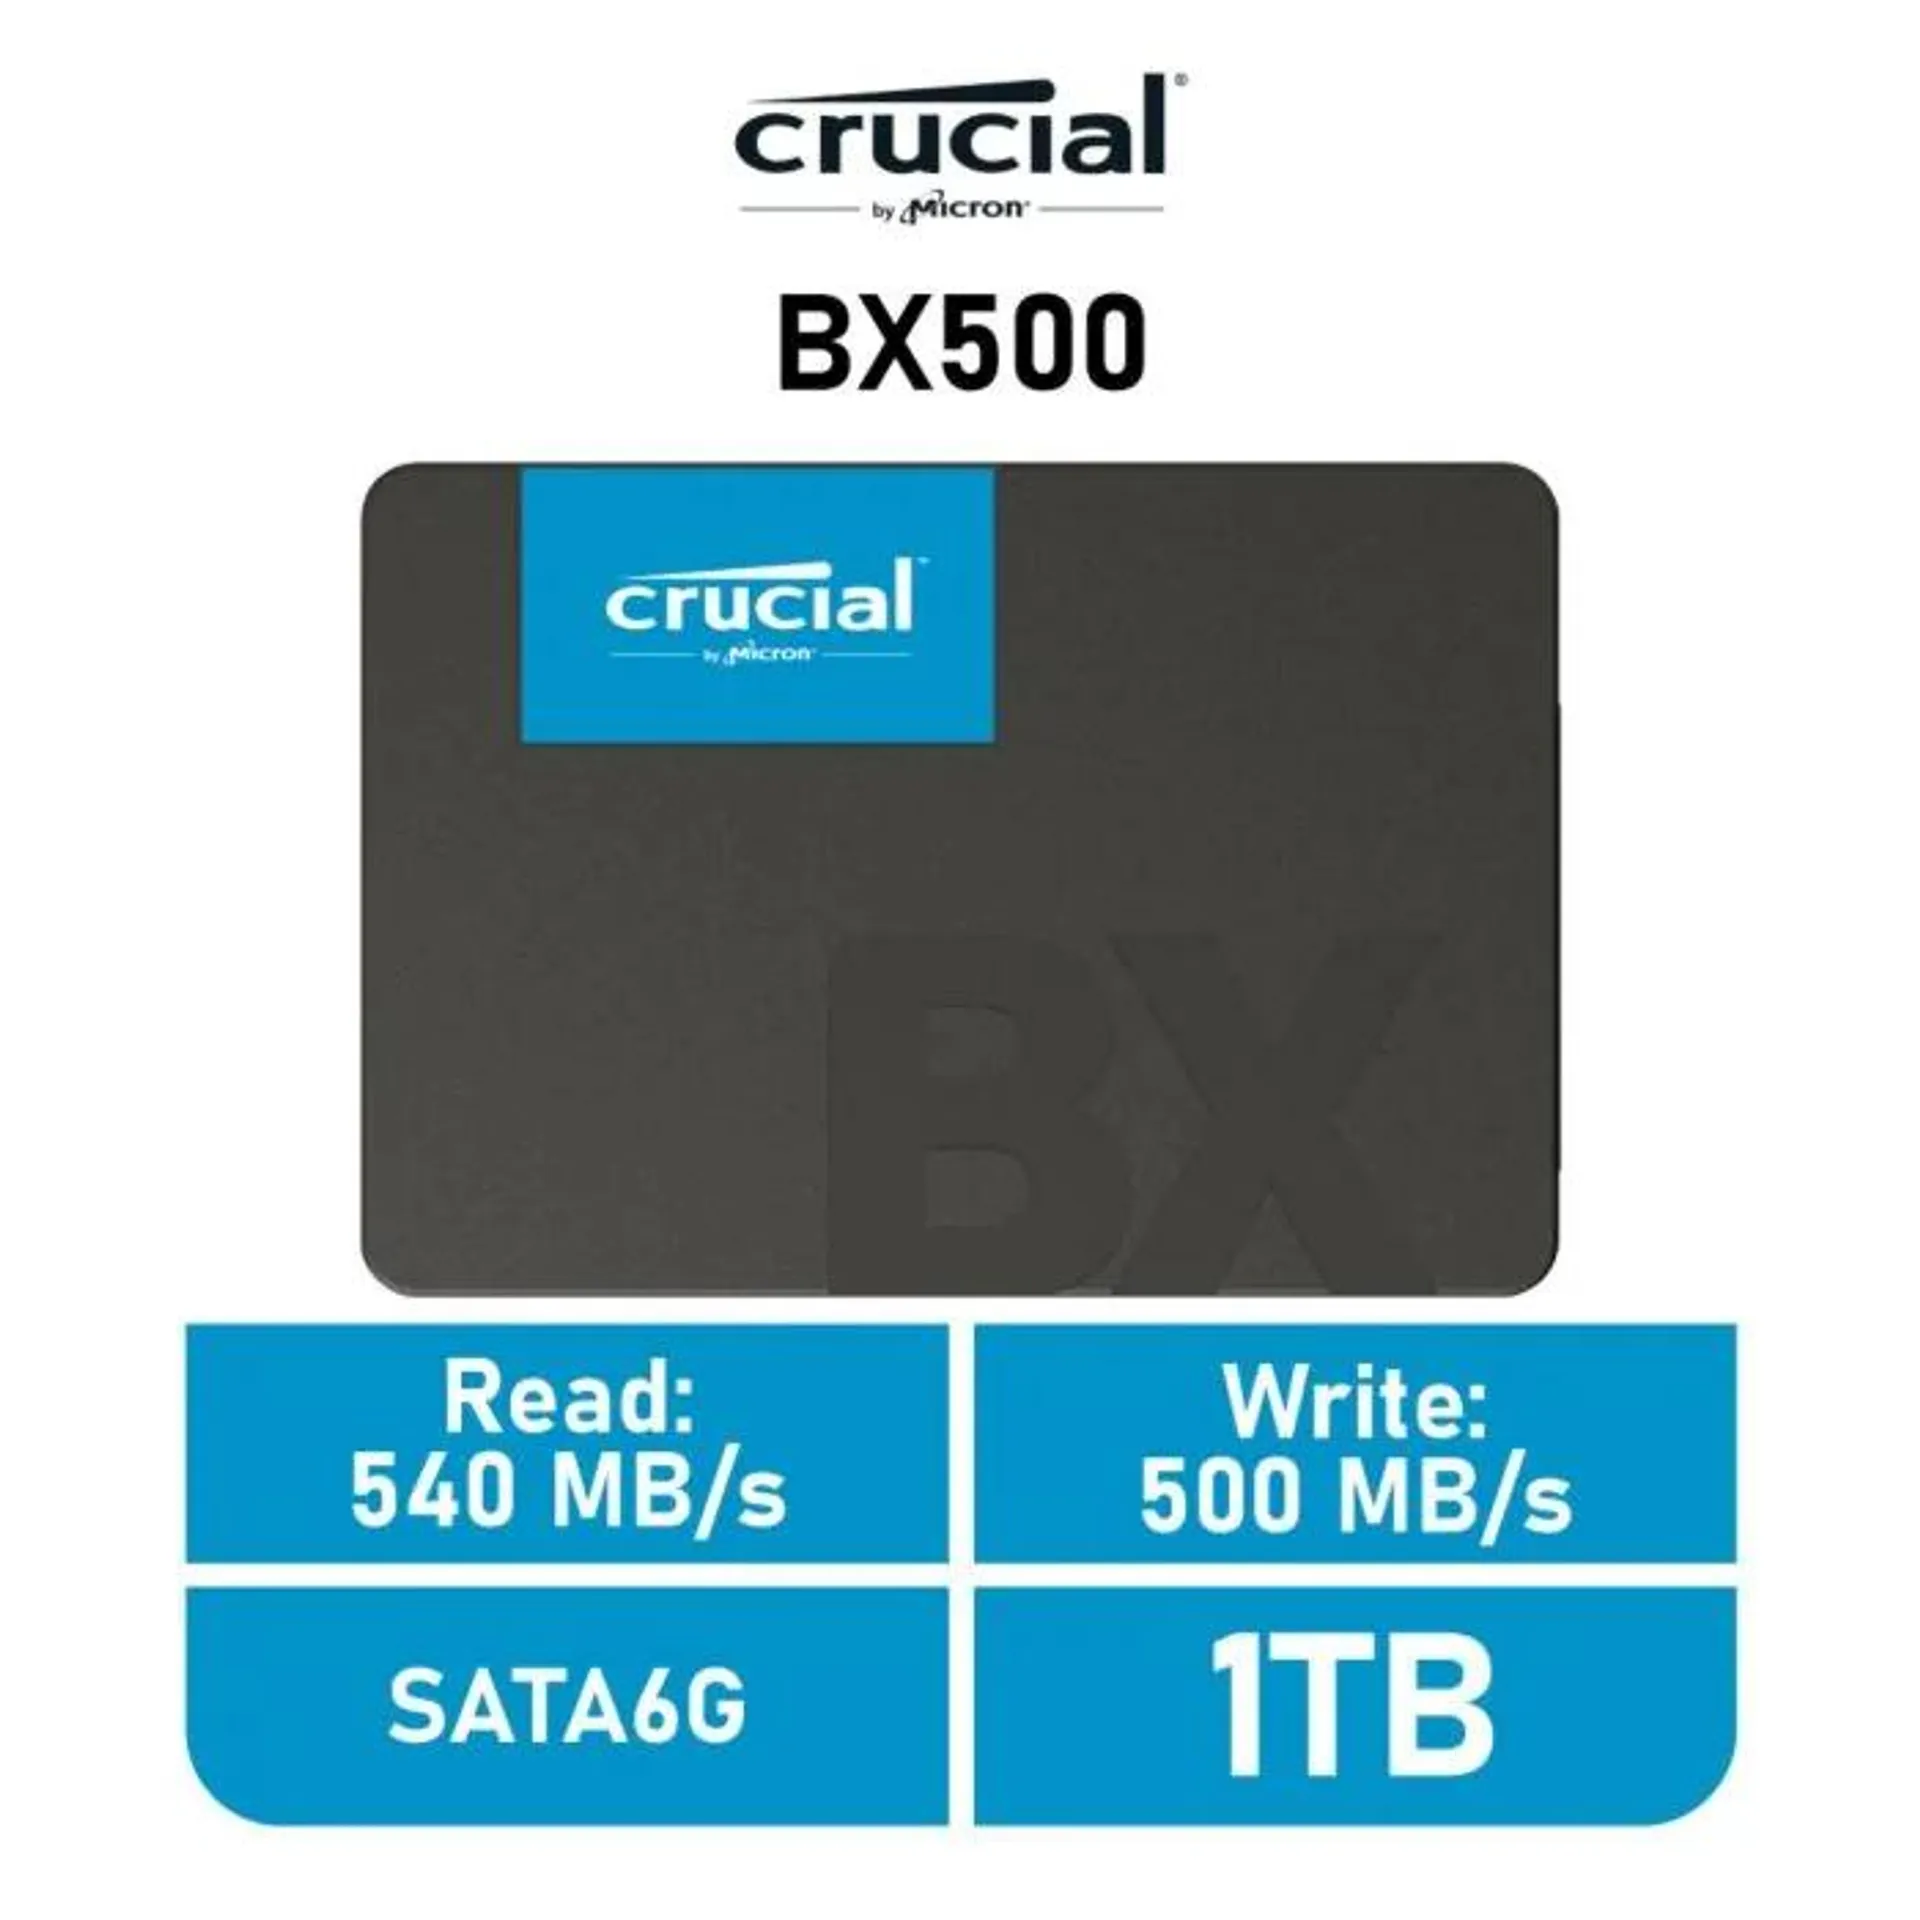 Crucial BX500 1TB SATA6G CT1000BX500SSD1 2.5" Solid State Drive